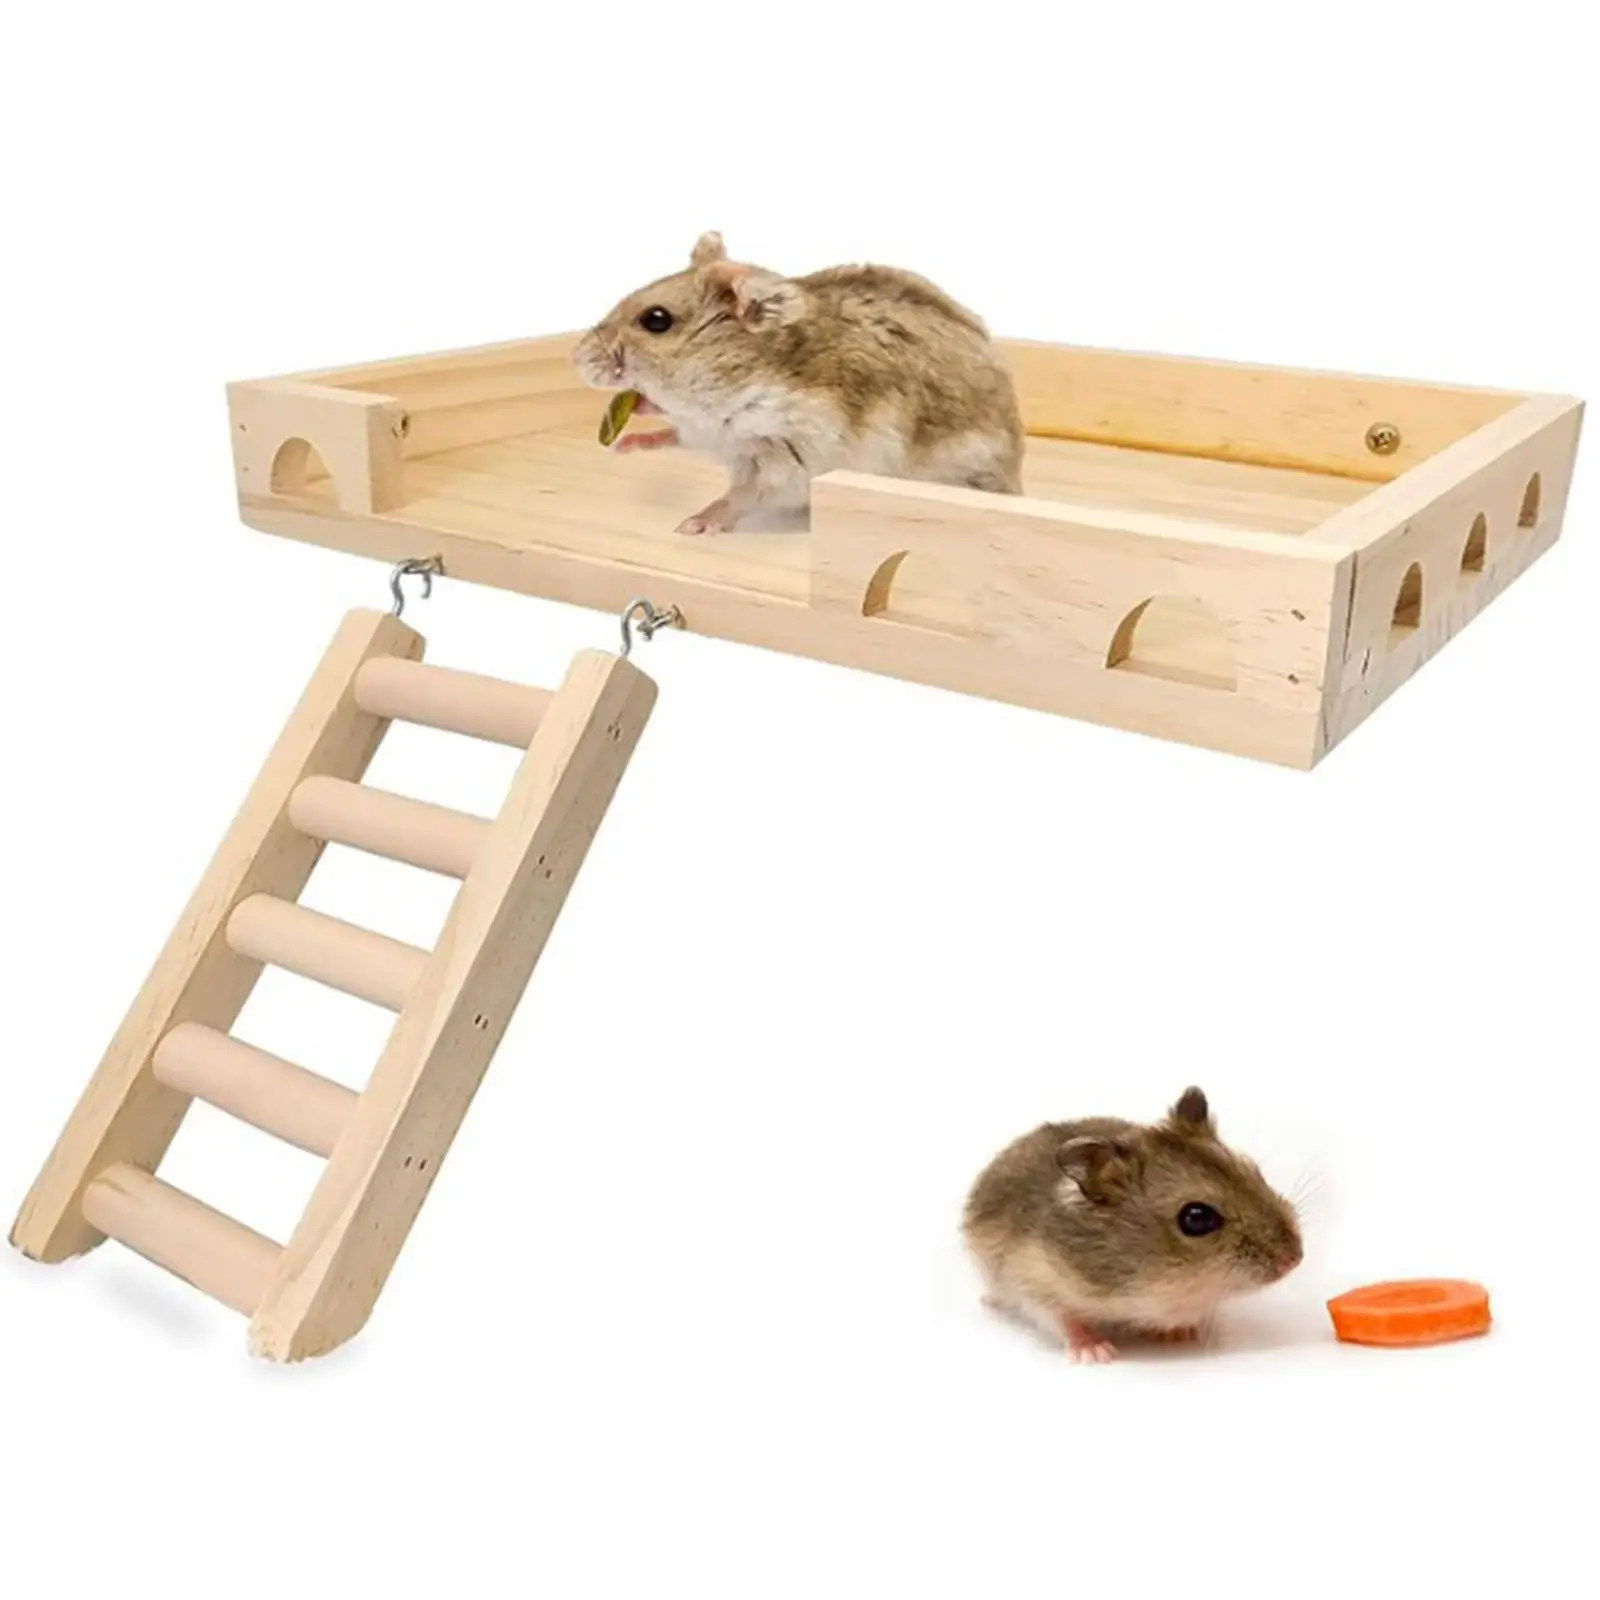 Hamster Wooden Ladder Toy Bird Cage Accessories Pet Bird Parrot Playground Chewing Exercise Toy Hamster Stand Platform Toys